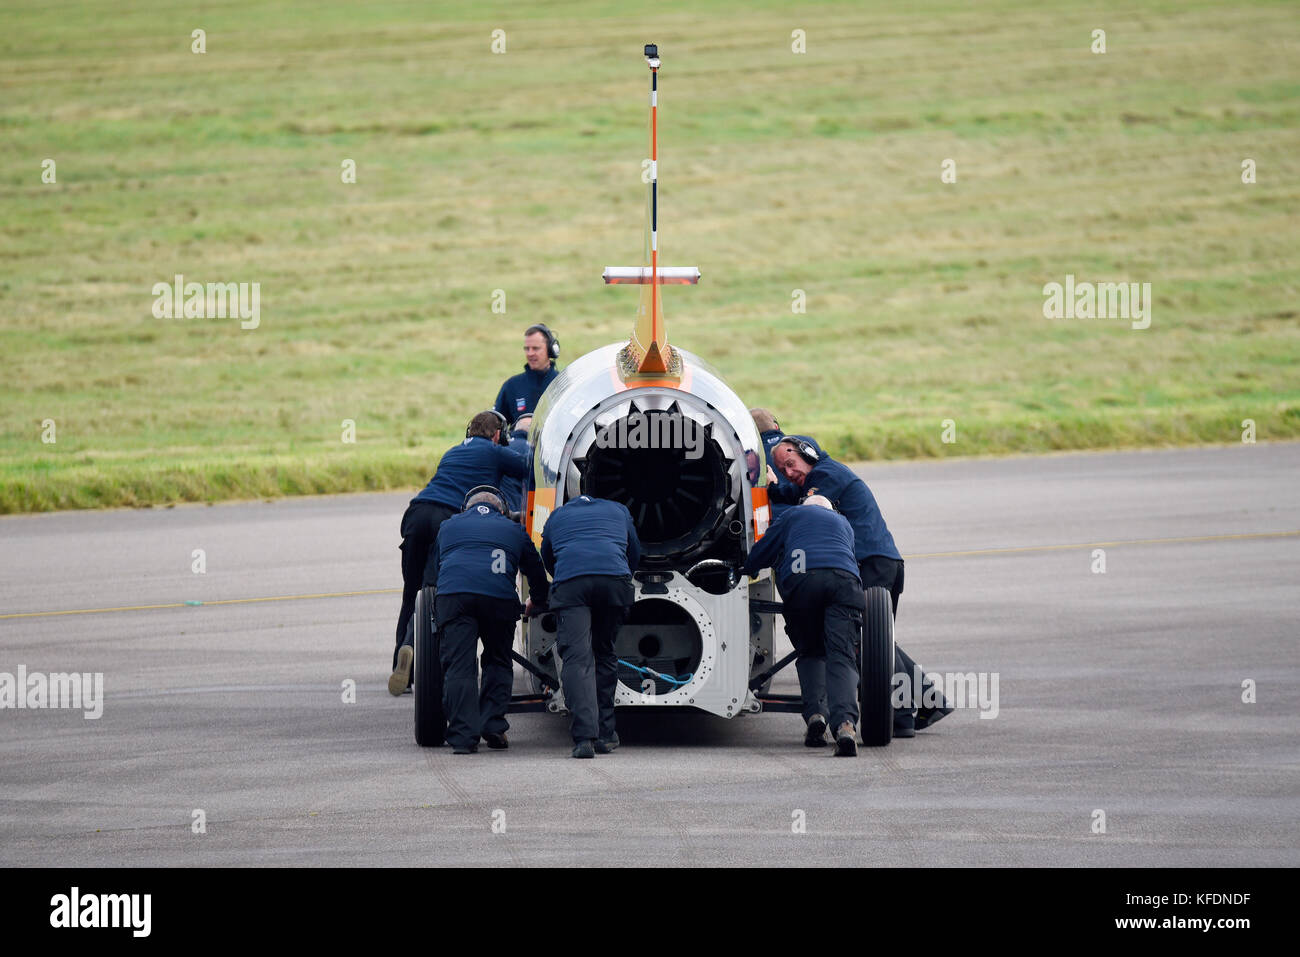 Crew pushing Bloodhound SSC supersonic car during testing at Cornwall Airport Newquay Stock Photo